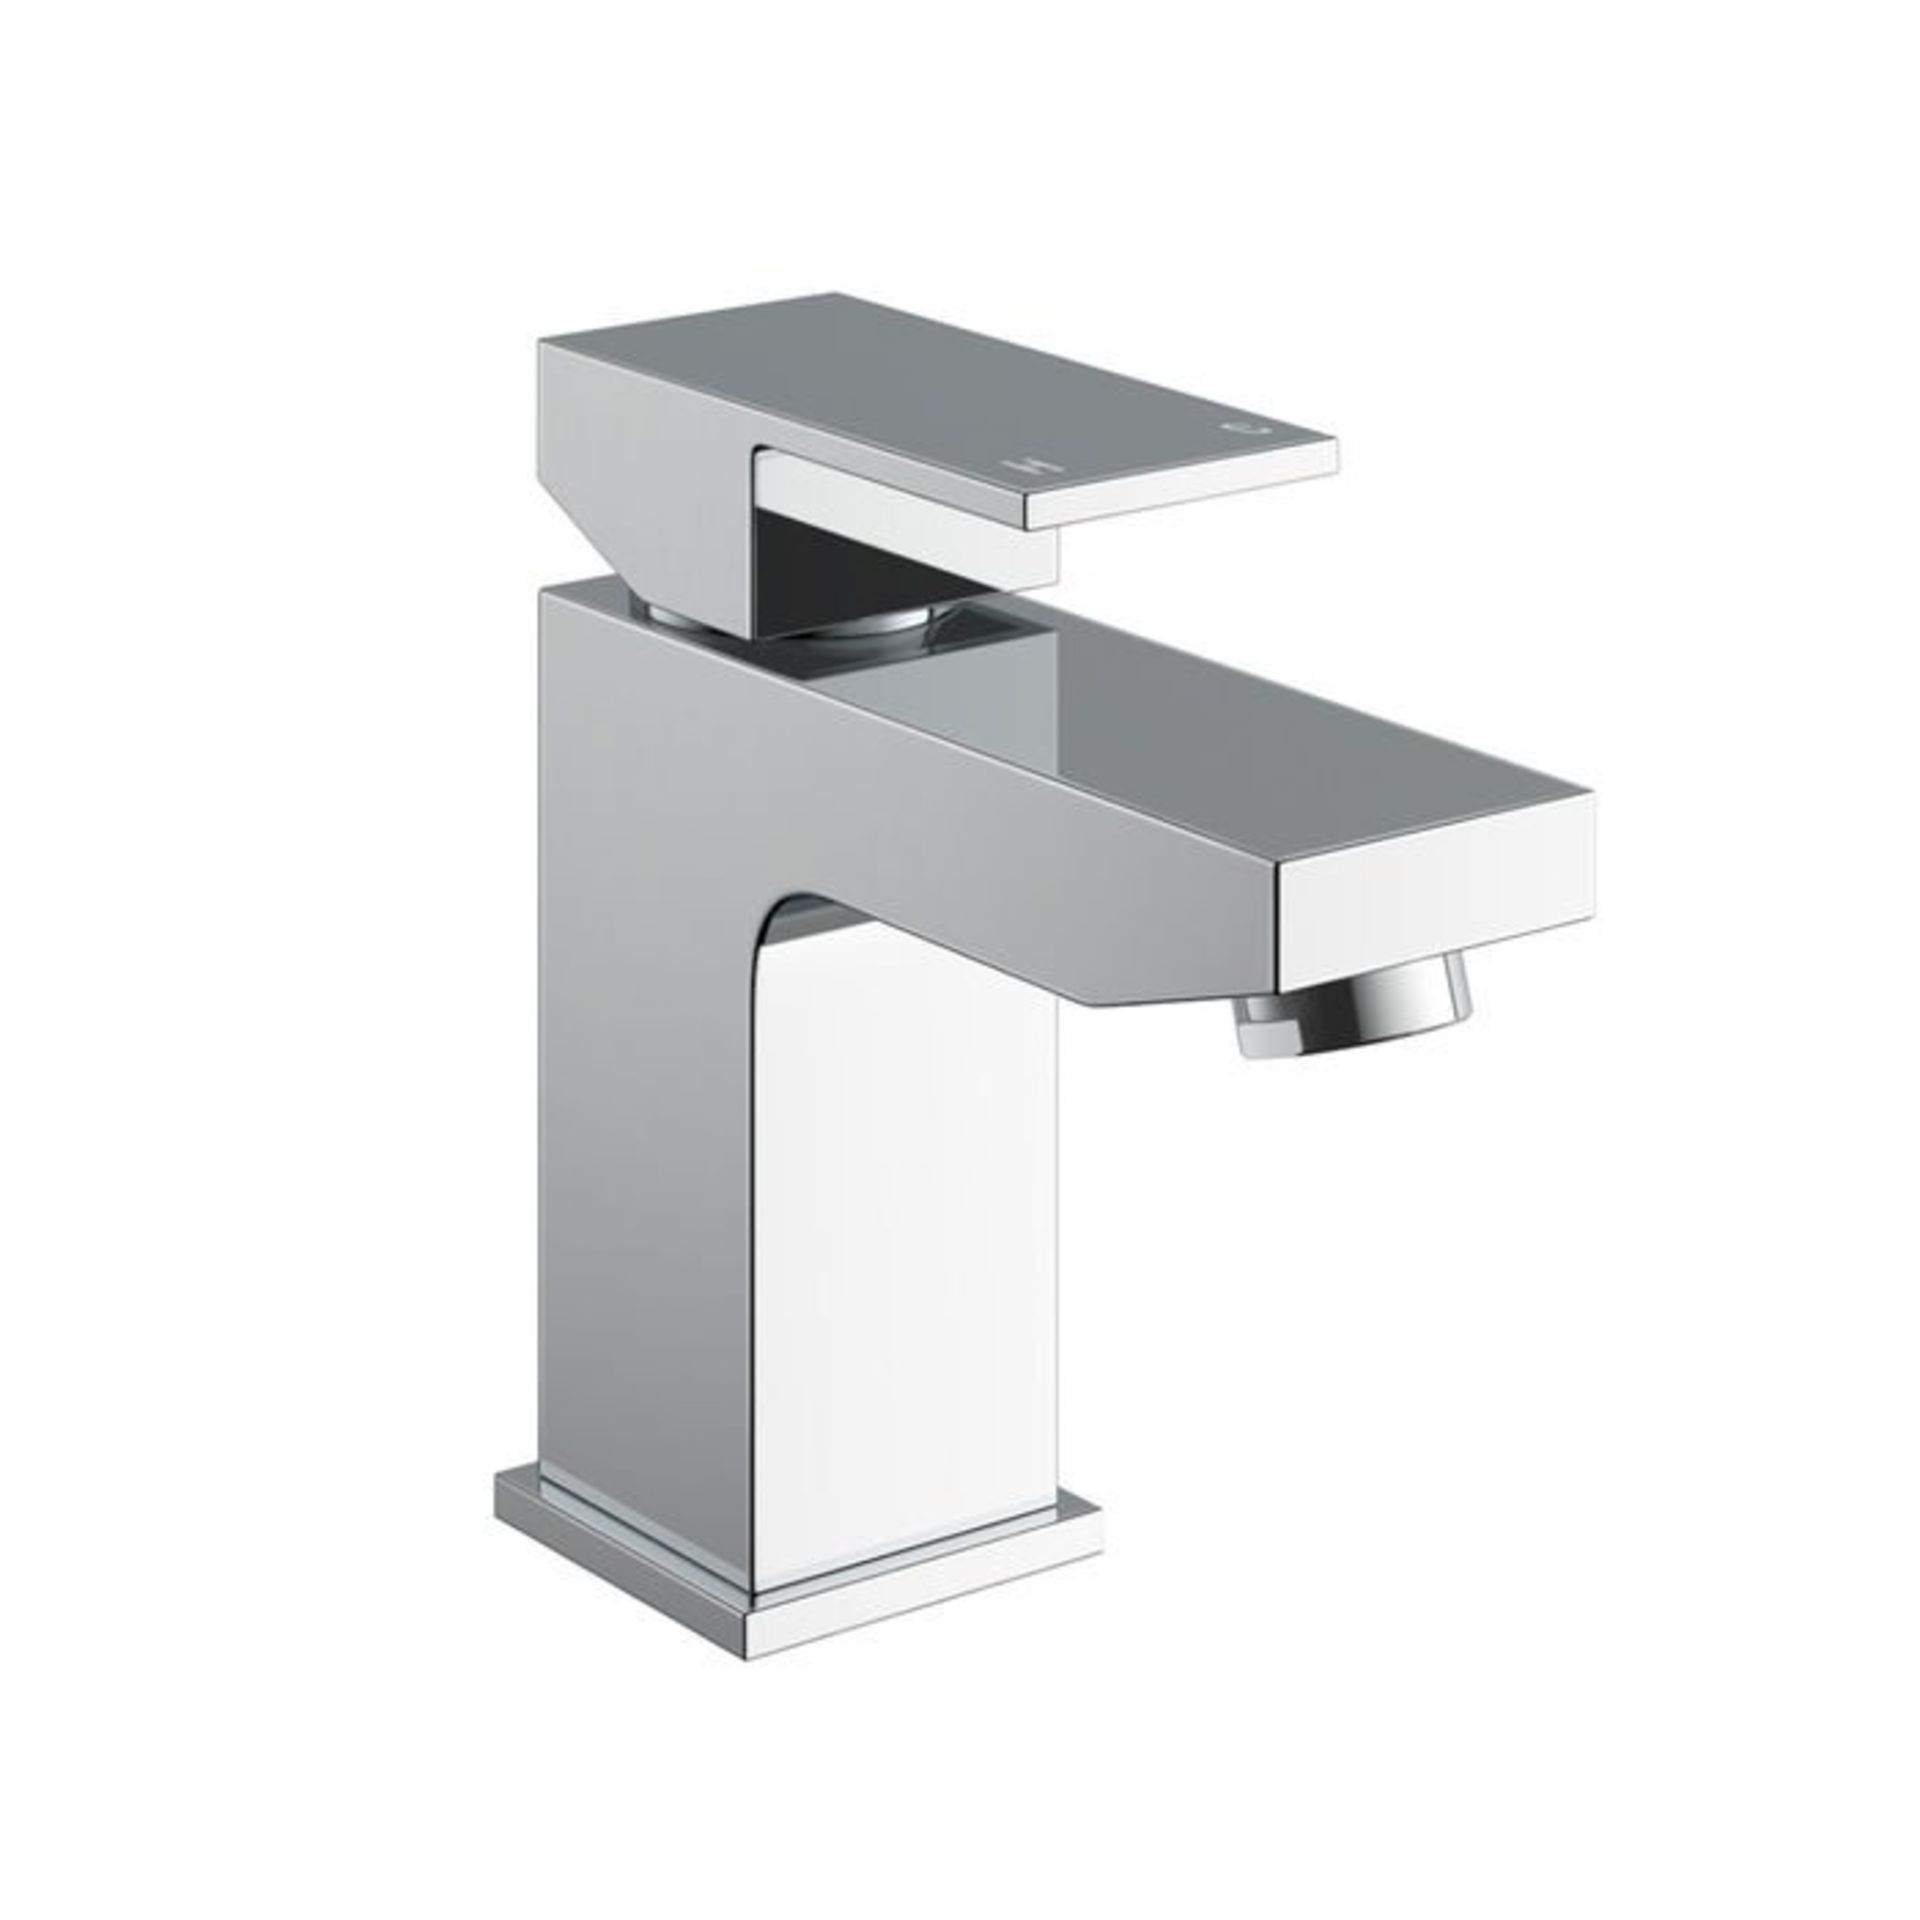 (S63) Harper Basin Mixer Tap Crafted from anti-corrosive chrome plated solid brass and includes a - Bild 3 aus 3